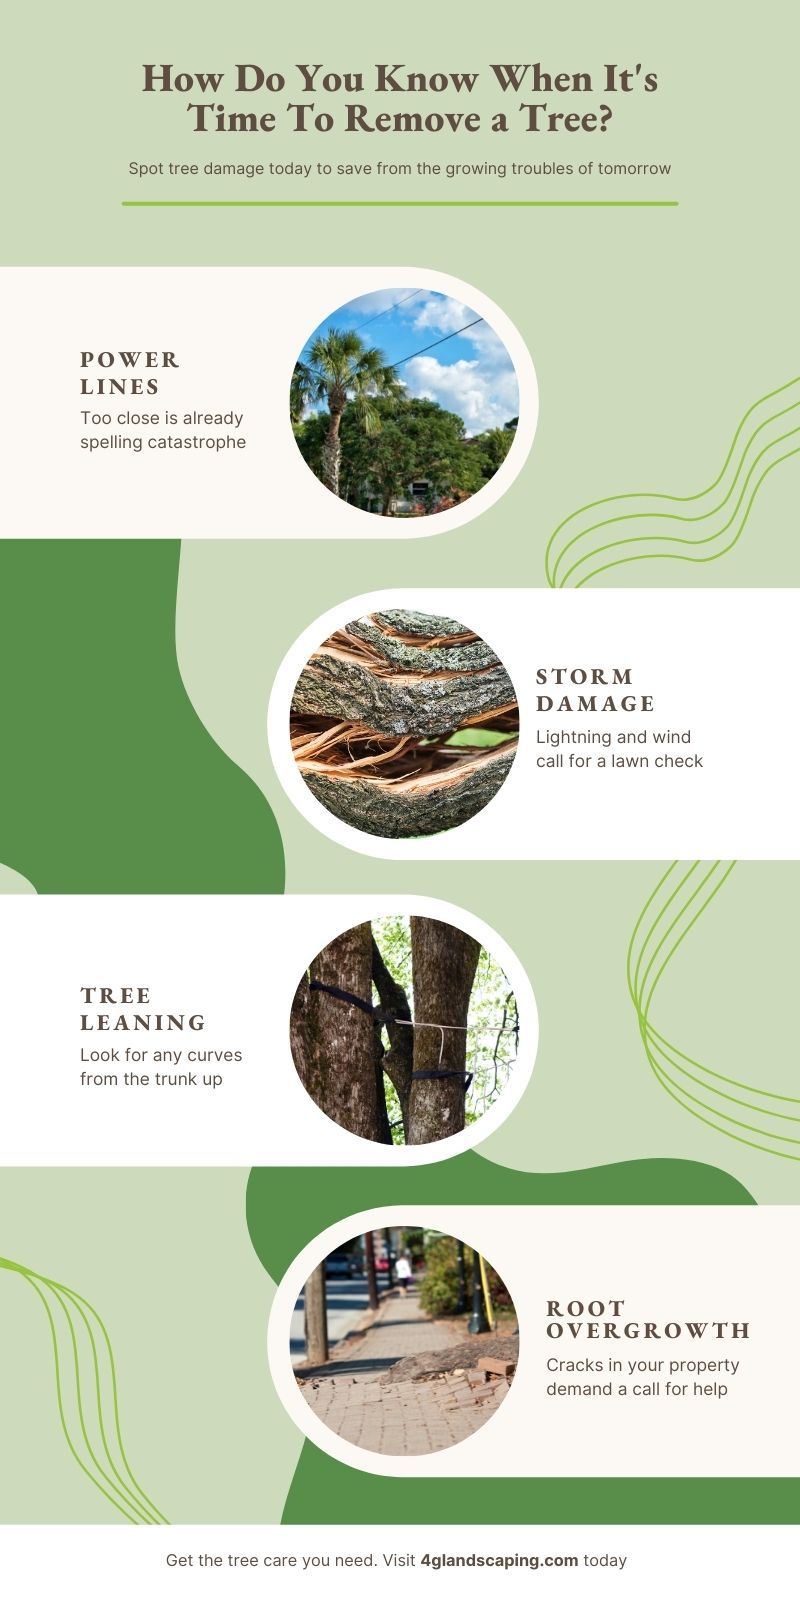 How Do You Know When It's Time to Remove A Tree Infographic